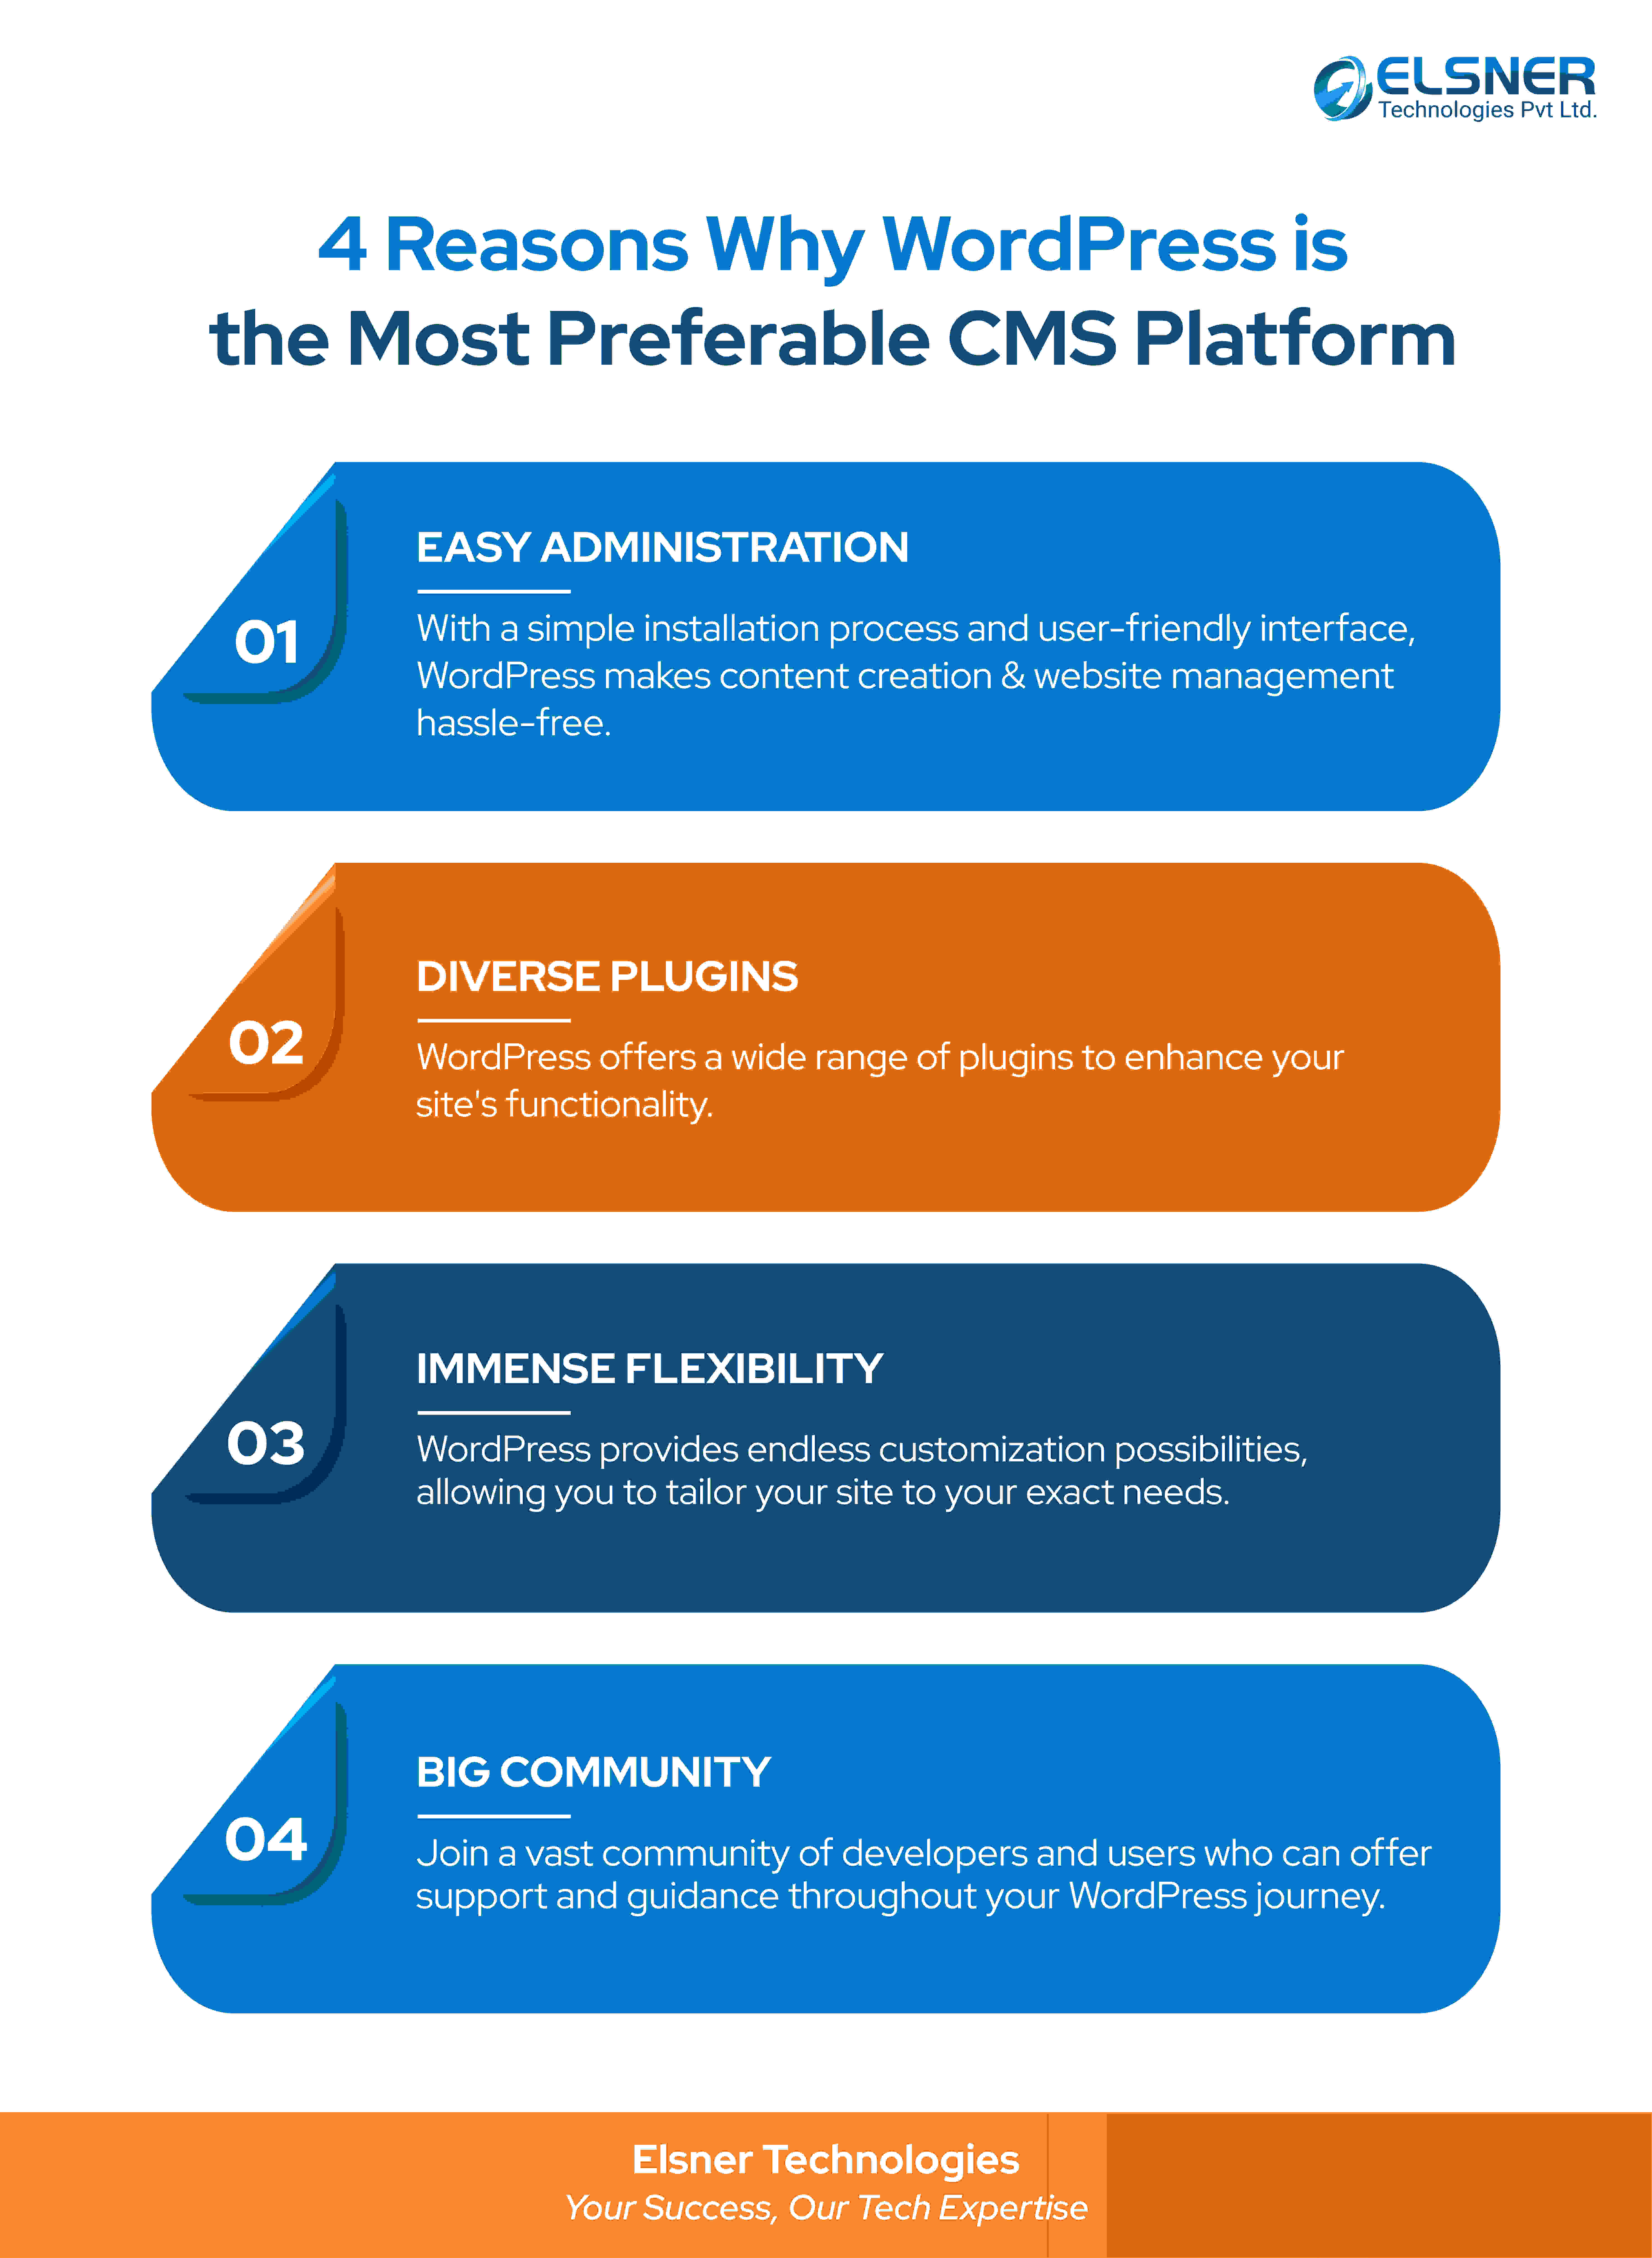 Reasons Why WordPress is most Preferable CMS Platform